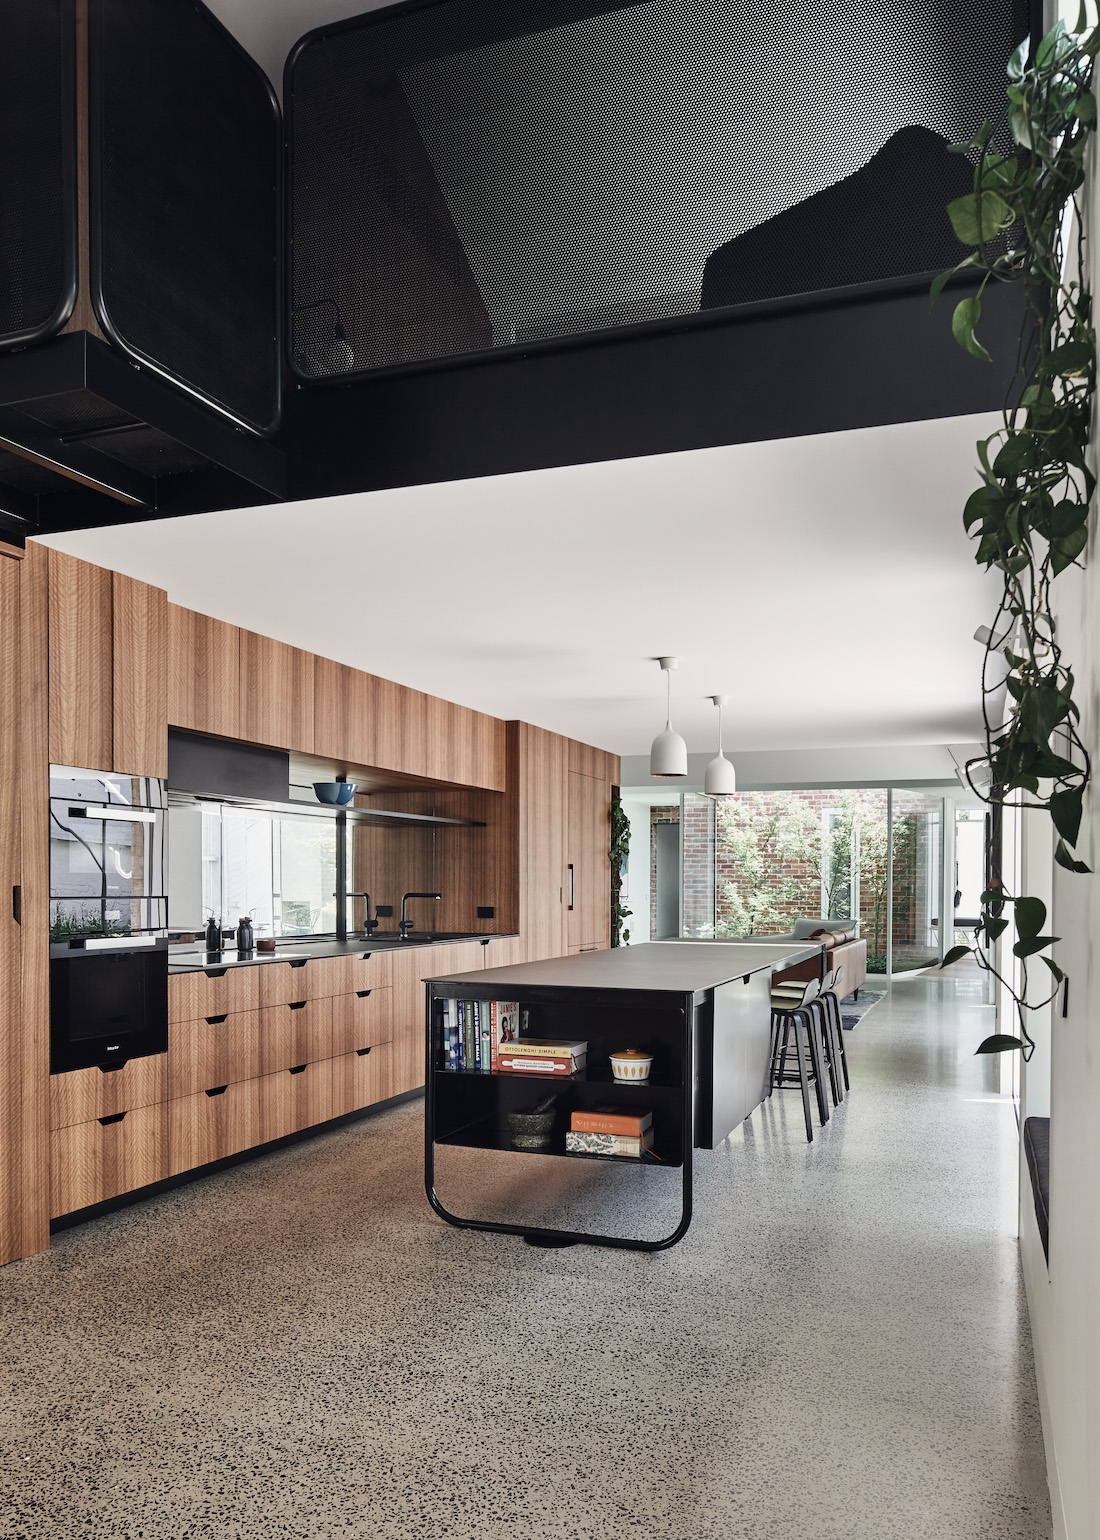 RaeRae Austin Maynard modern kitchen with timber and black accents